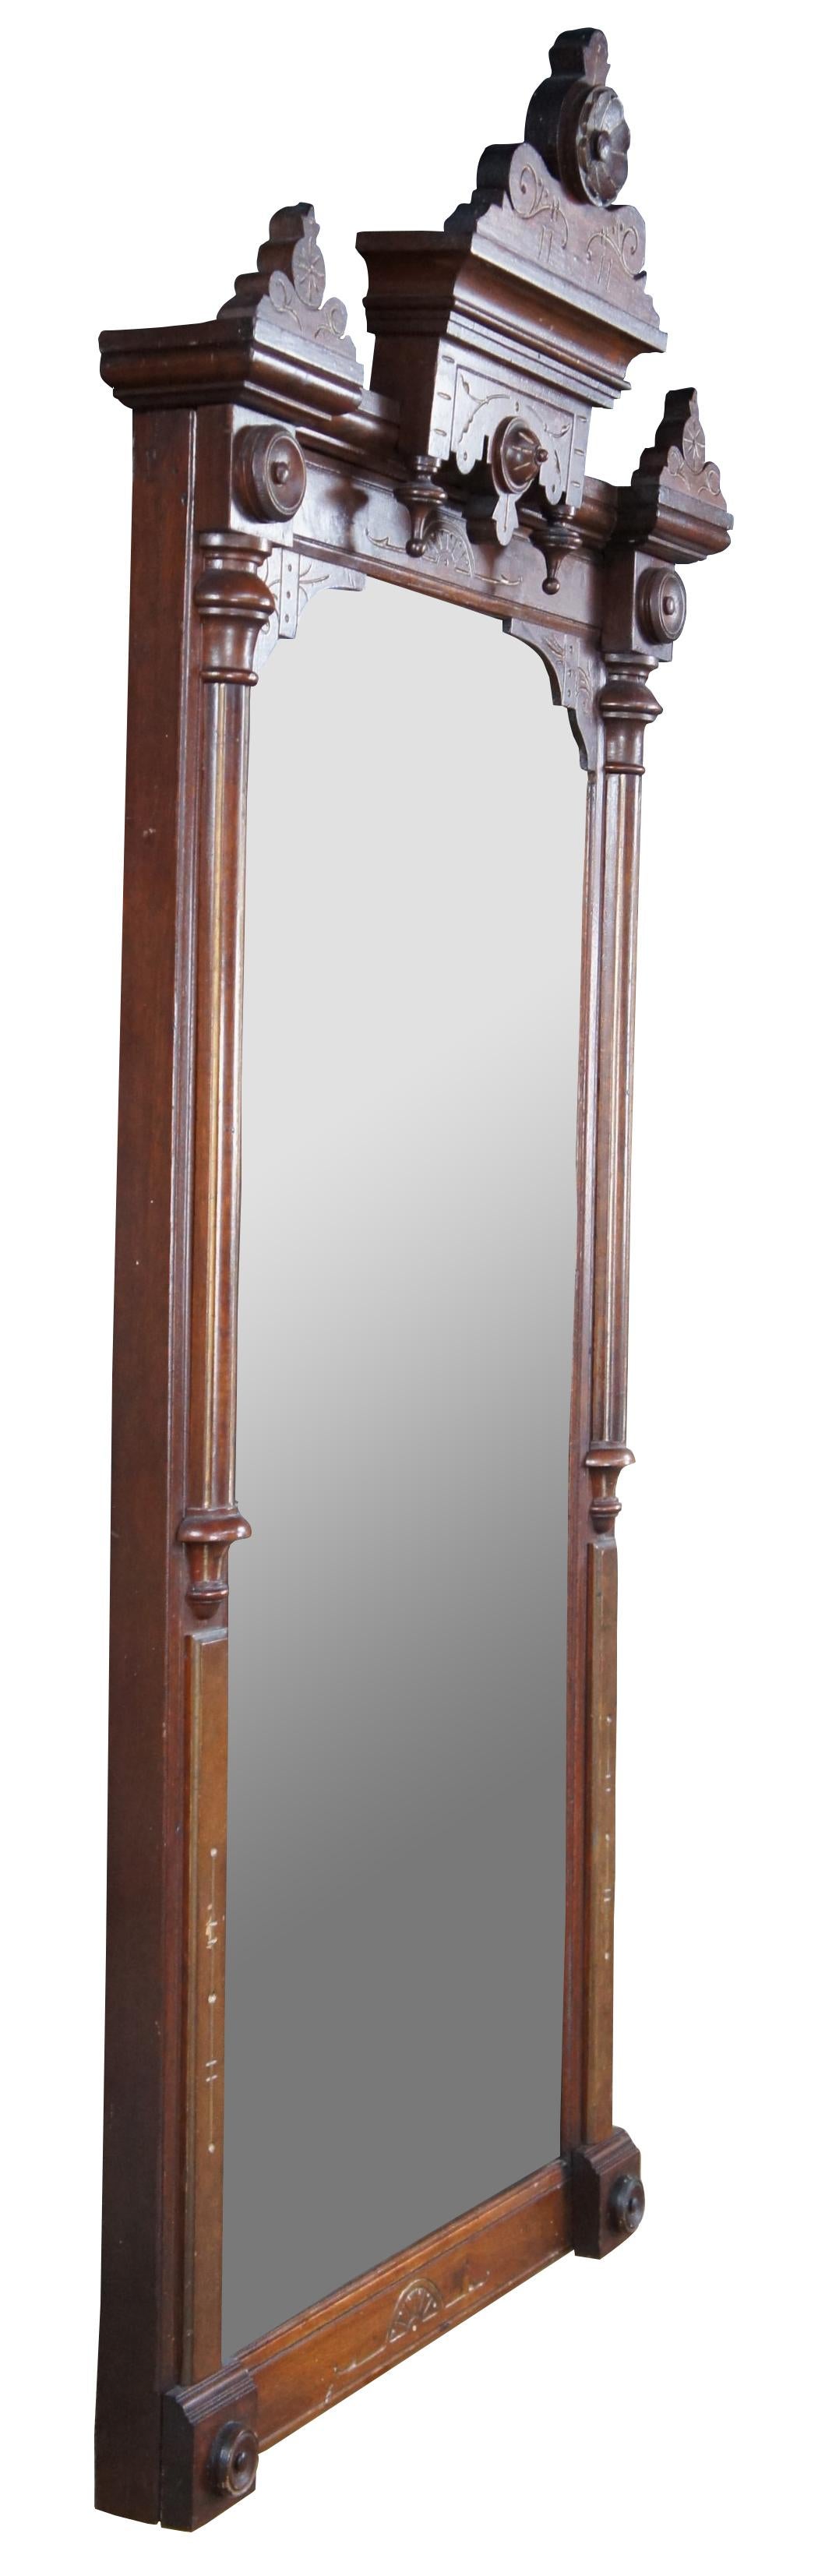 Antique Victorian Eastlake mirror. Made of walnut with burled panels. Features rectangular form with ornate crown and carvings of floral and circular medallions, drop finials and fluted columns. Measure: 67